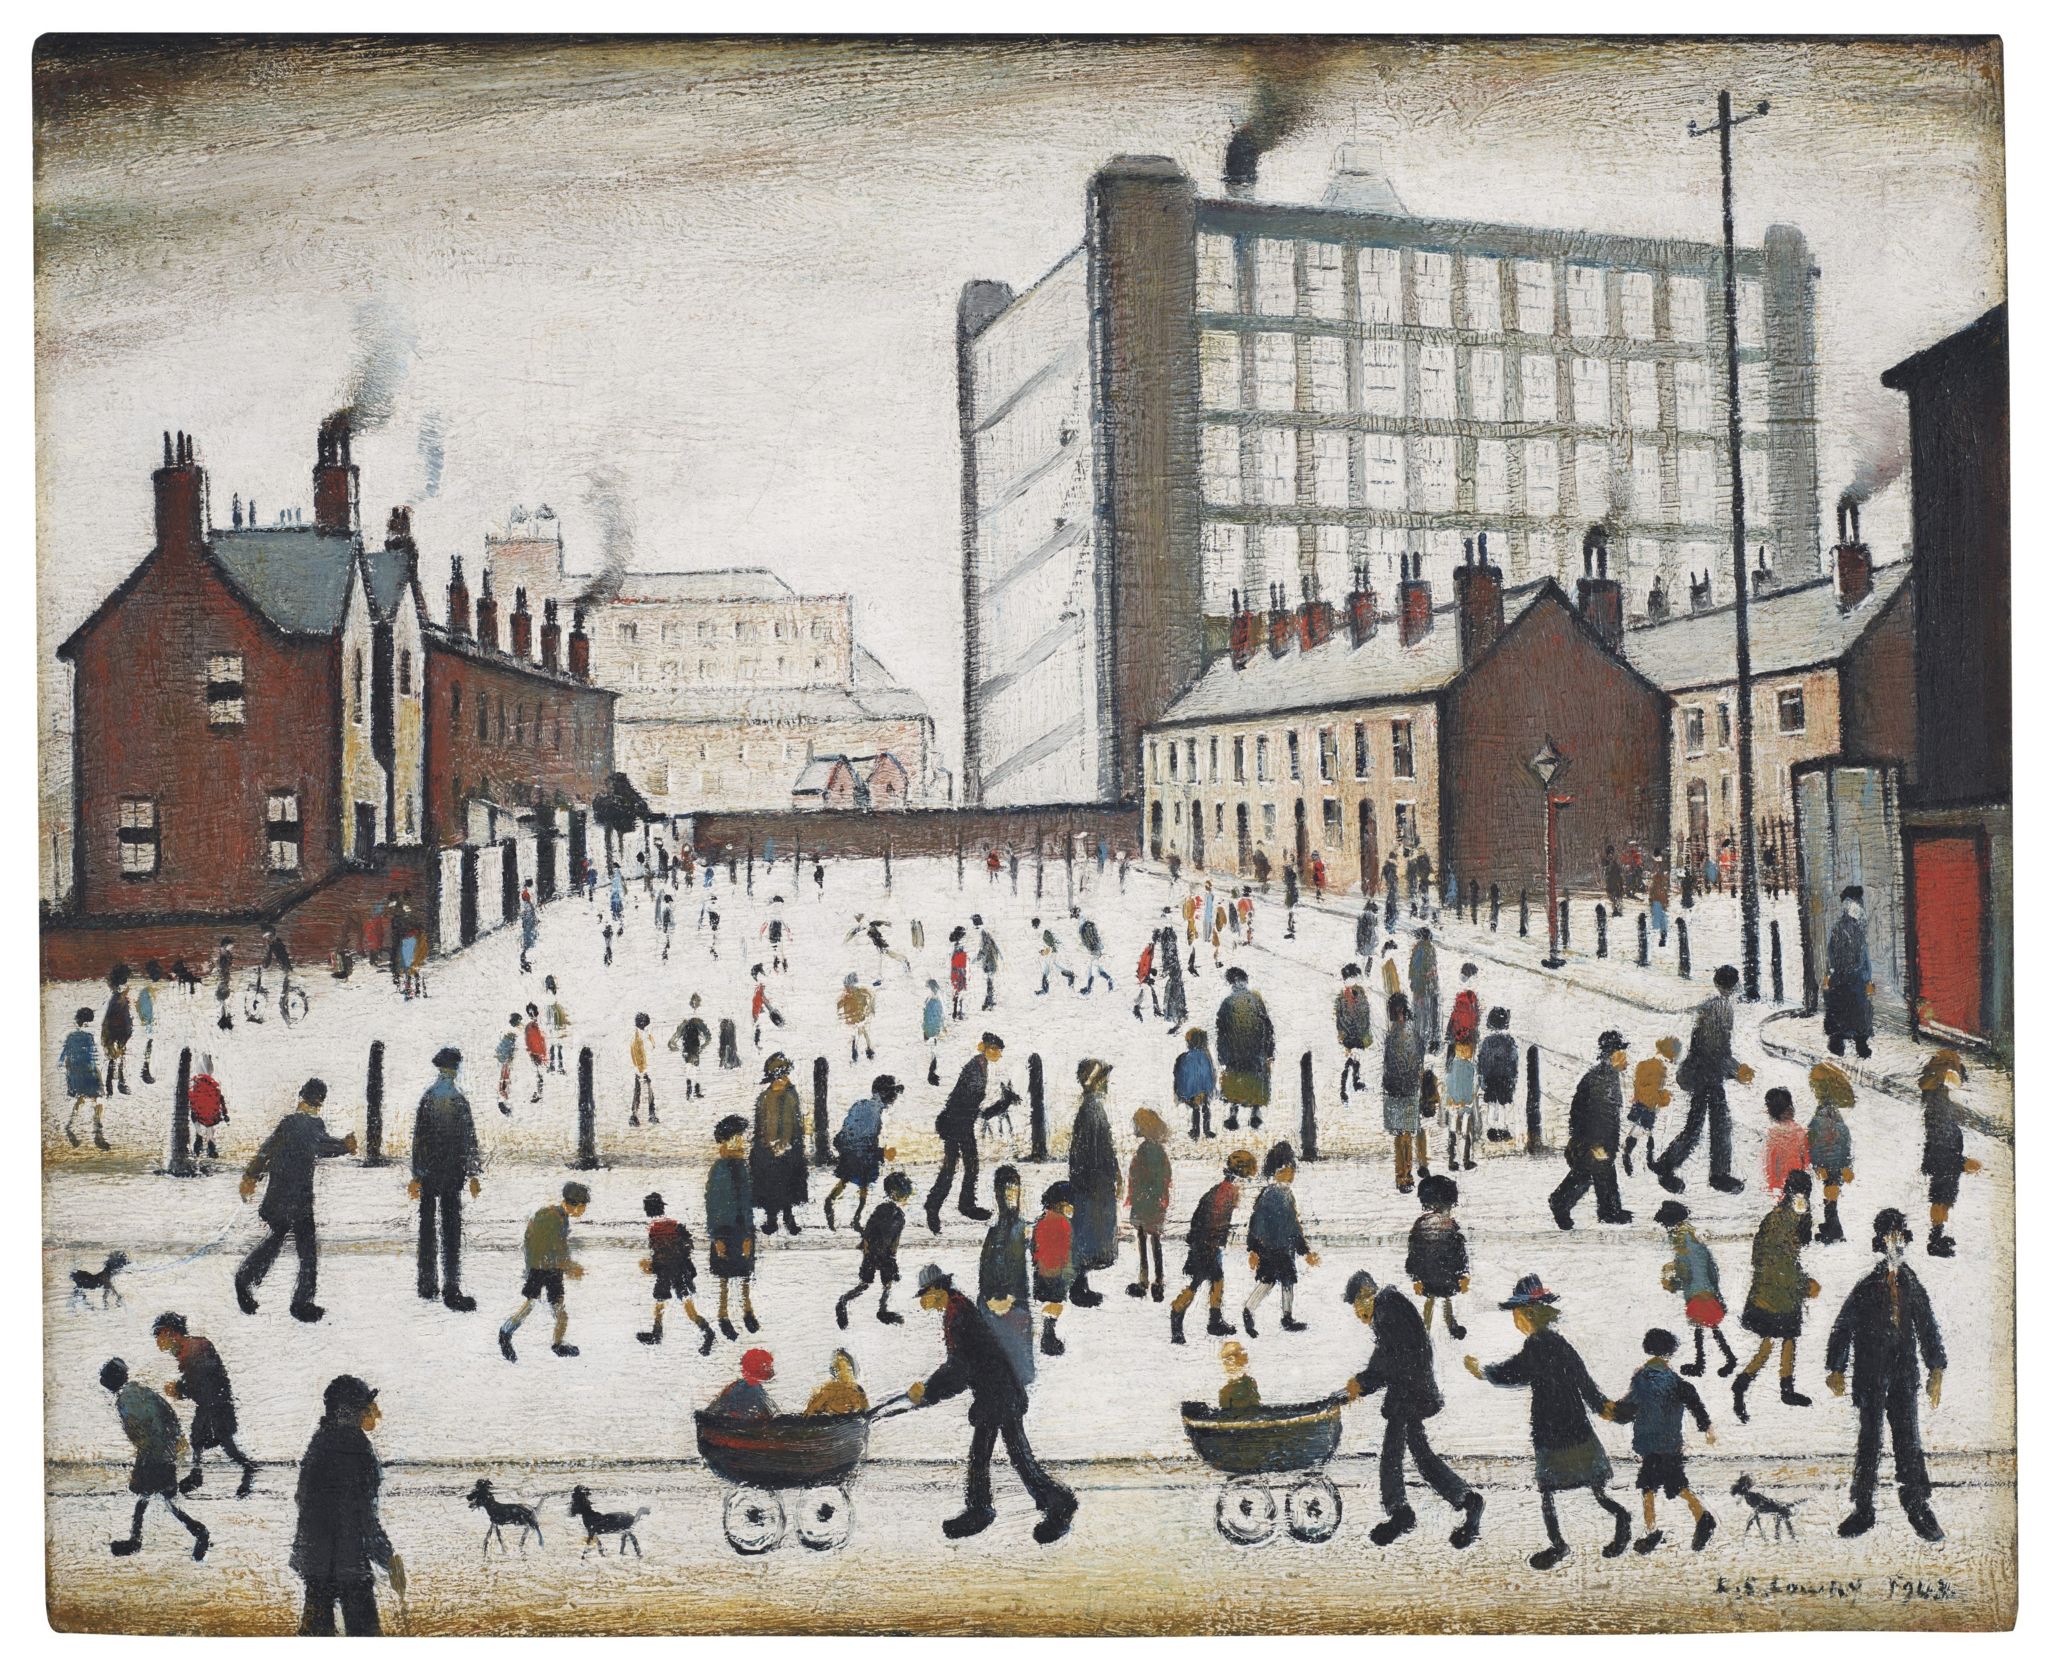 LS Lowry's 1943 painting entitled The Mill, Pendlebury